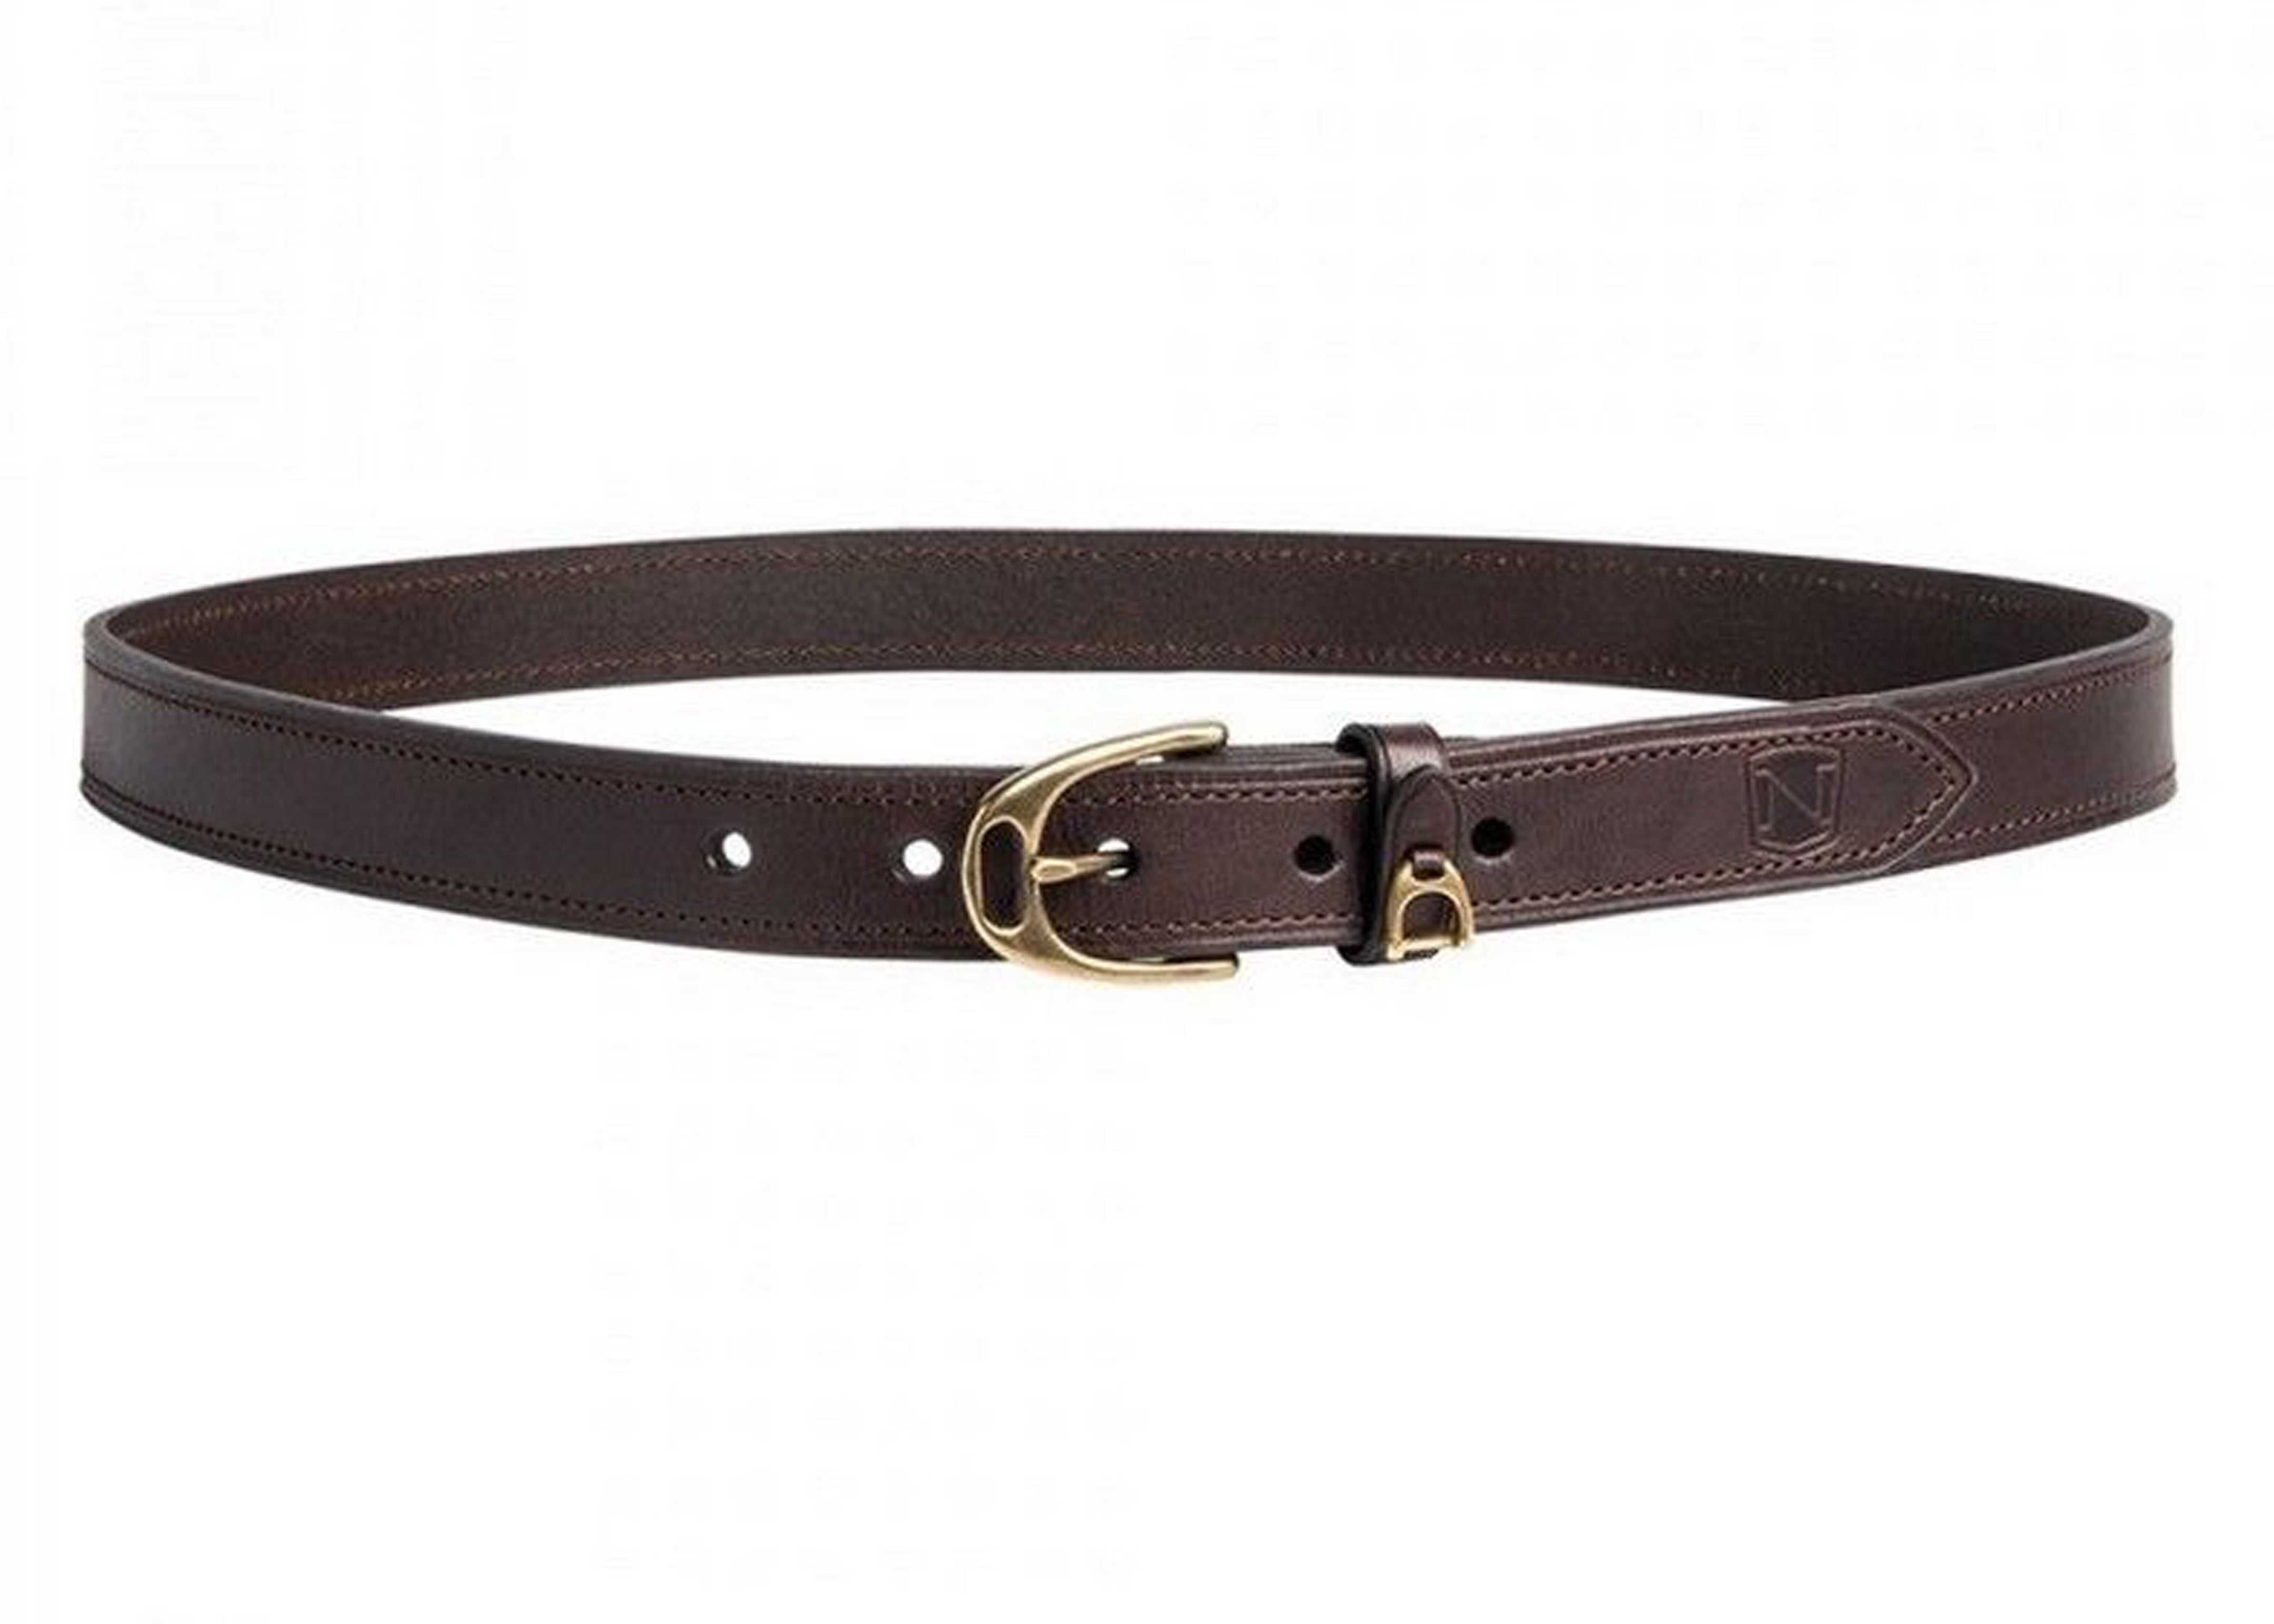 Noble Outfitters "Equus Charm" English Belt - XL